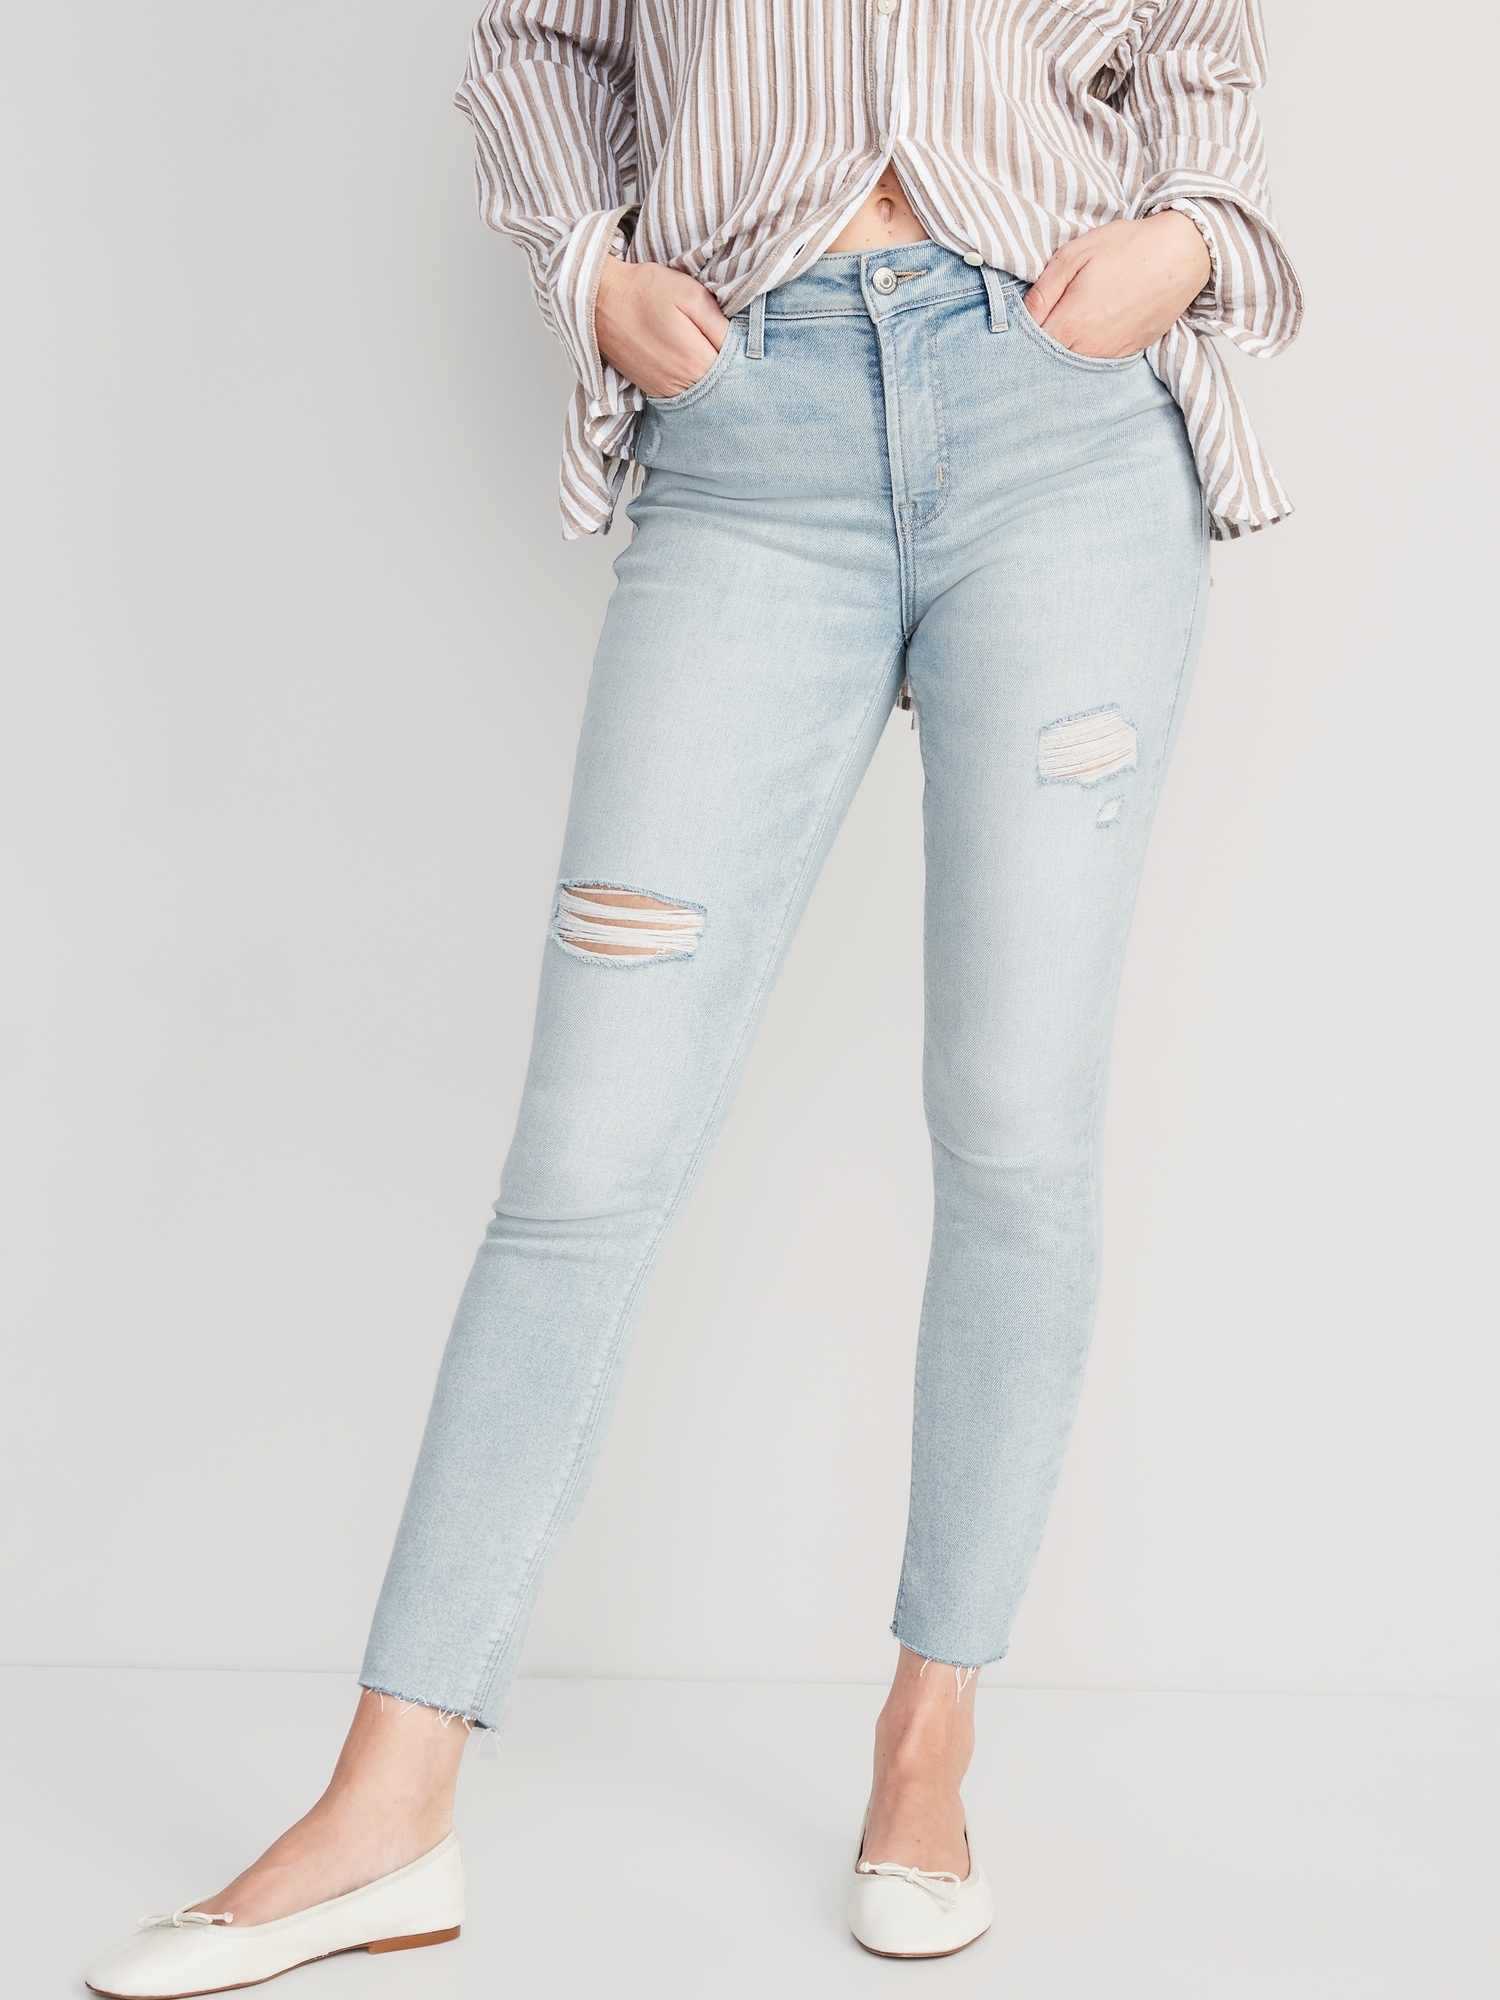 Old Navy High-Waisted Rockstar Super-Skinny Distressed Ankle Jeans for Women blue. 1